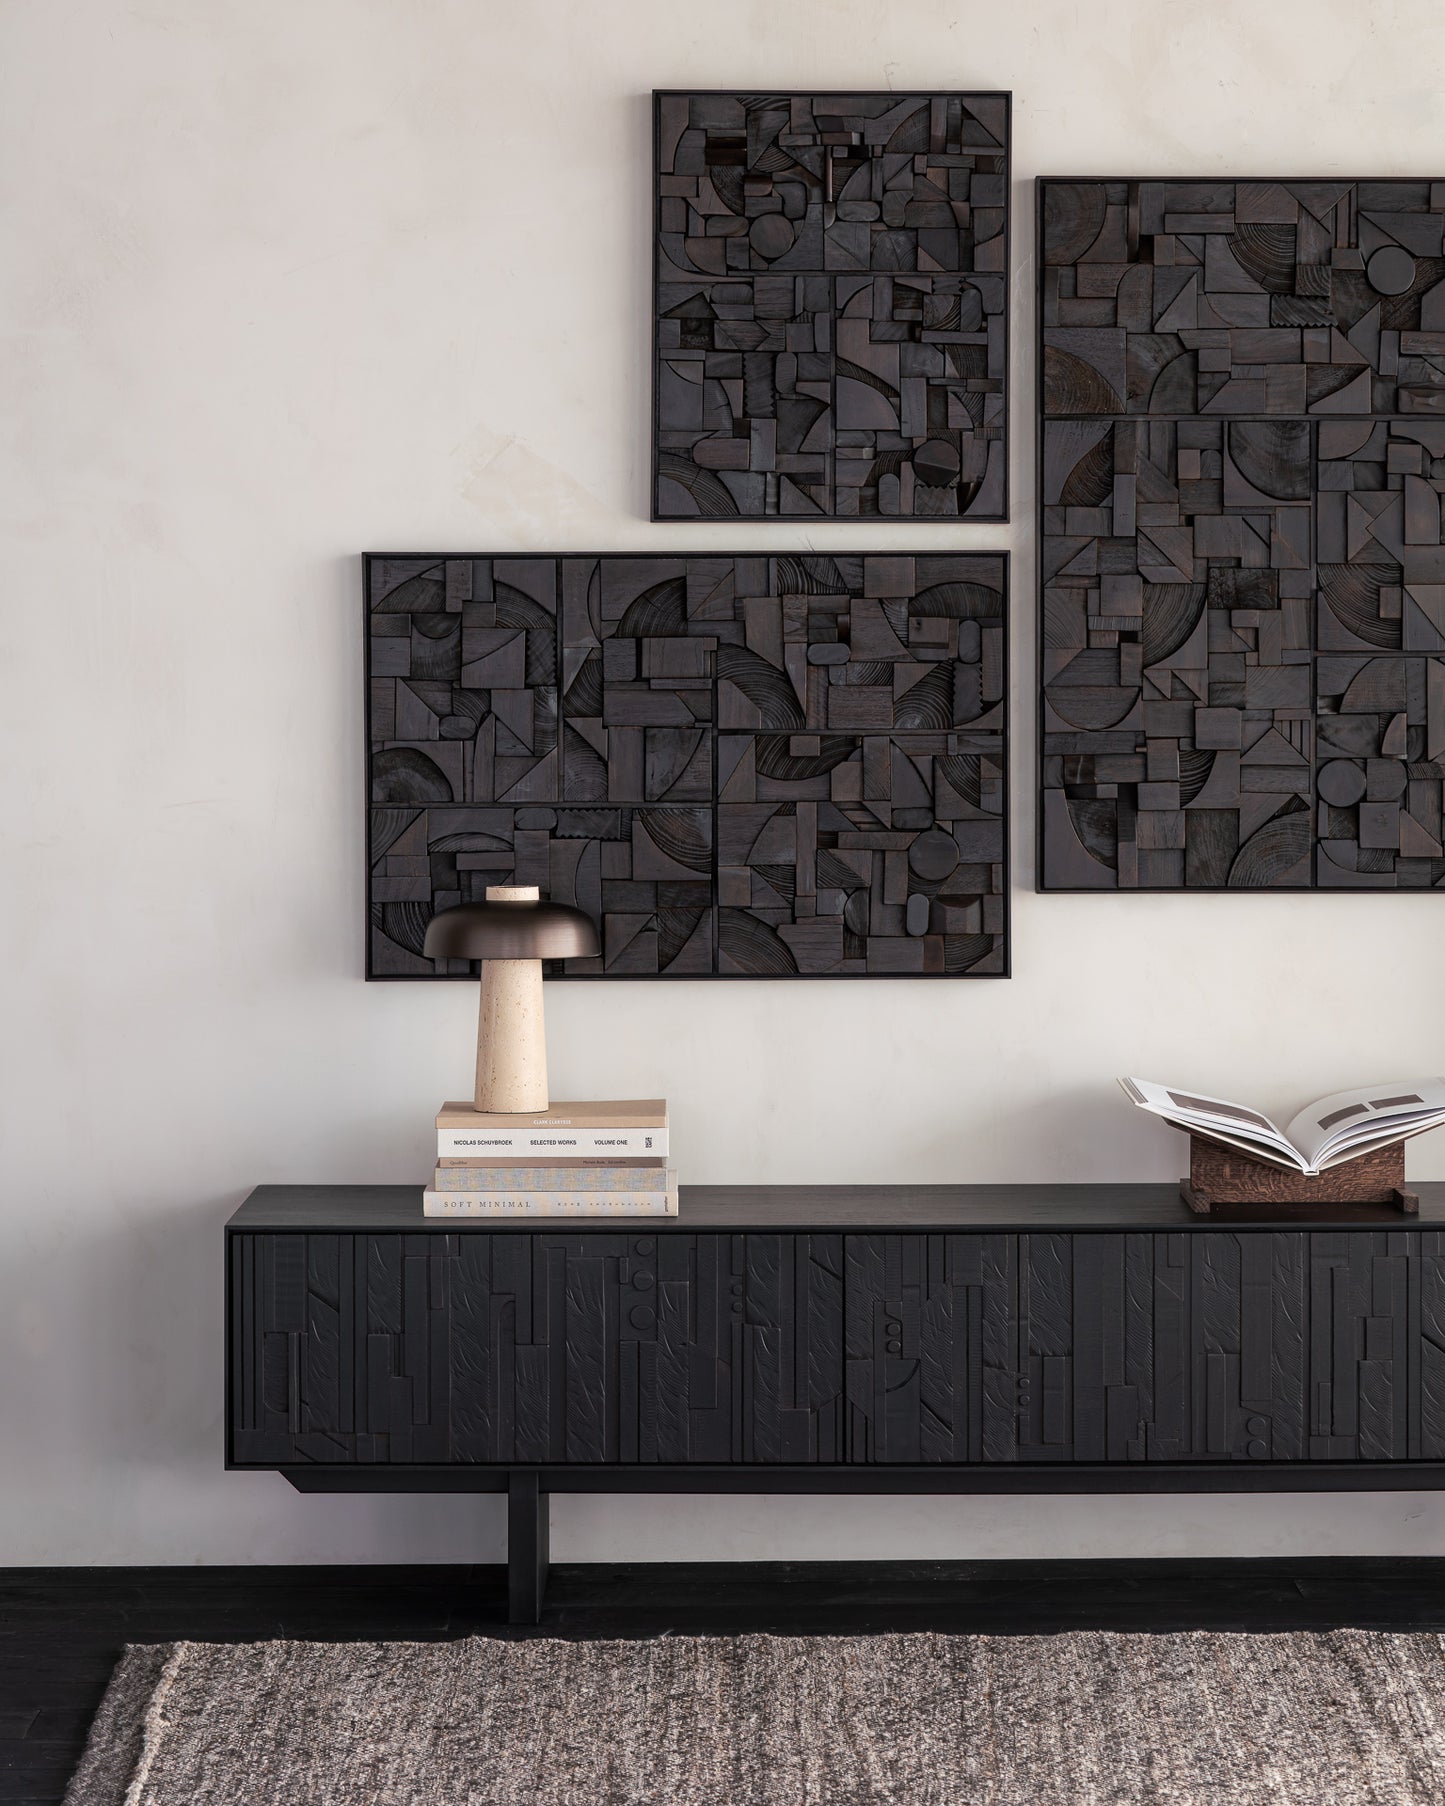 Ethnicraft Teak Mosaic TV Cupoard Unit is available from Make Your House A Home, Bendigo, Victoria, Australia